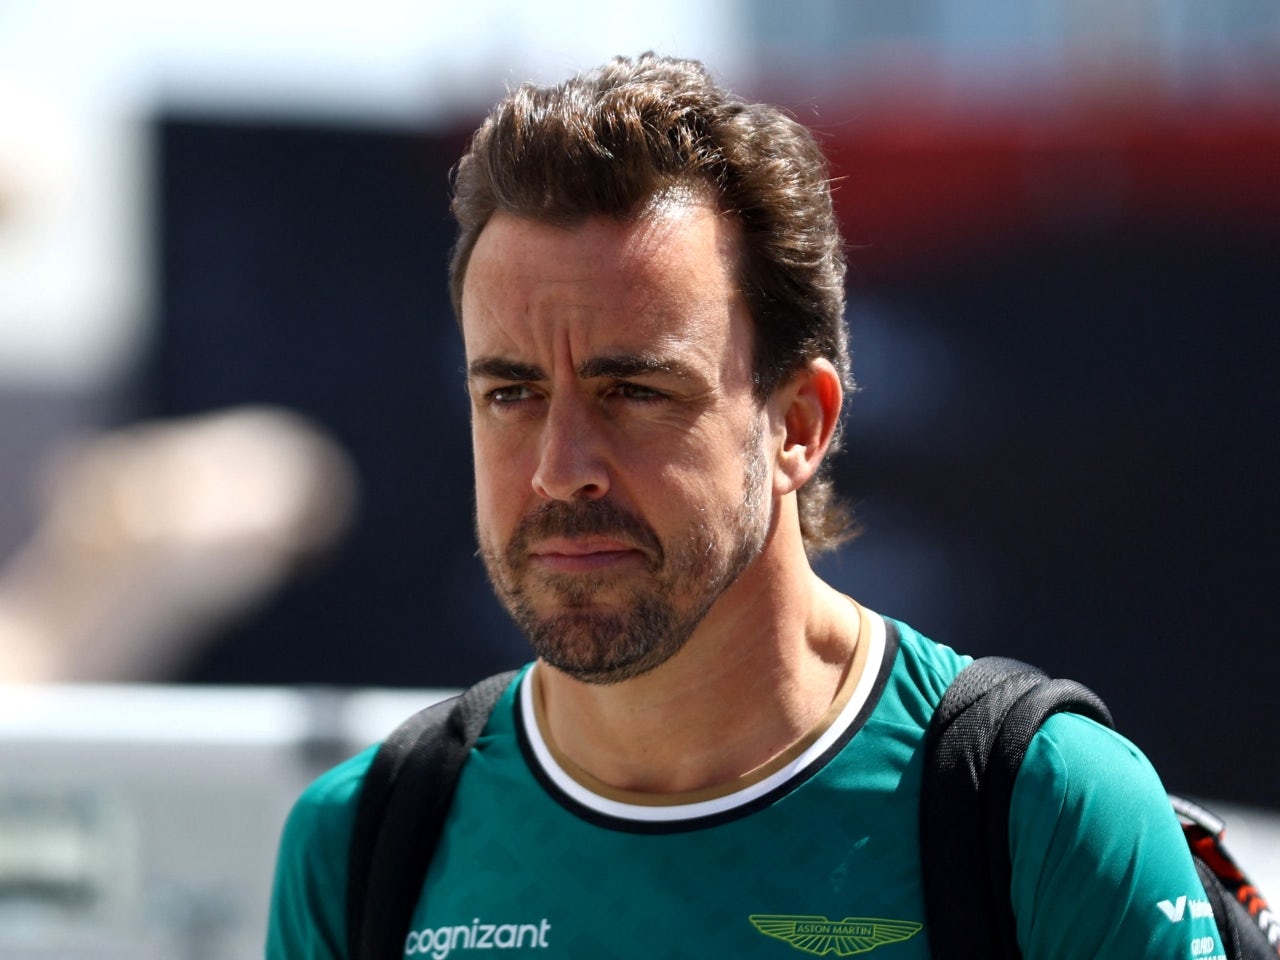 'Not fair' to delay 2025 plans for too long - Alonso